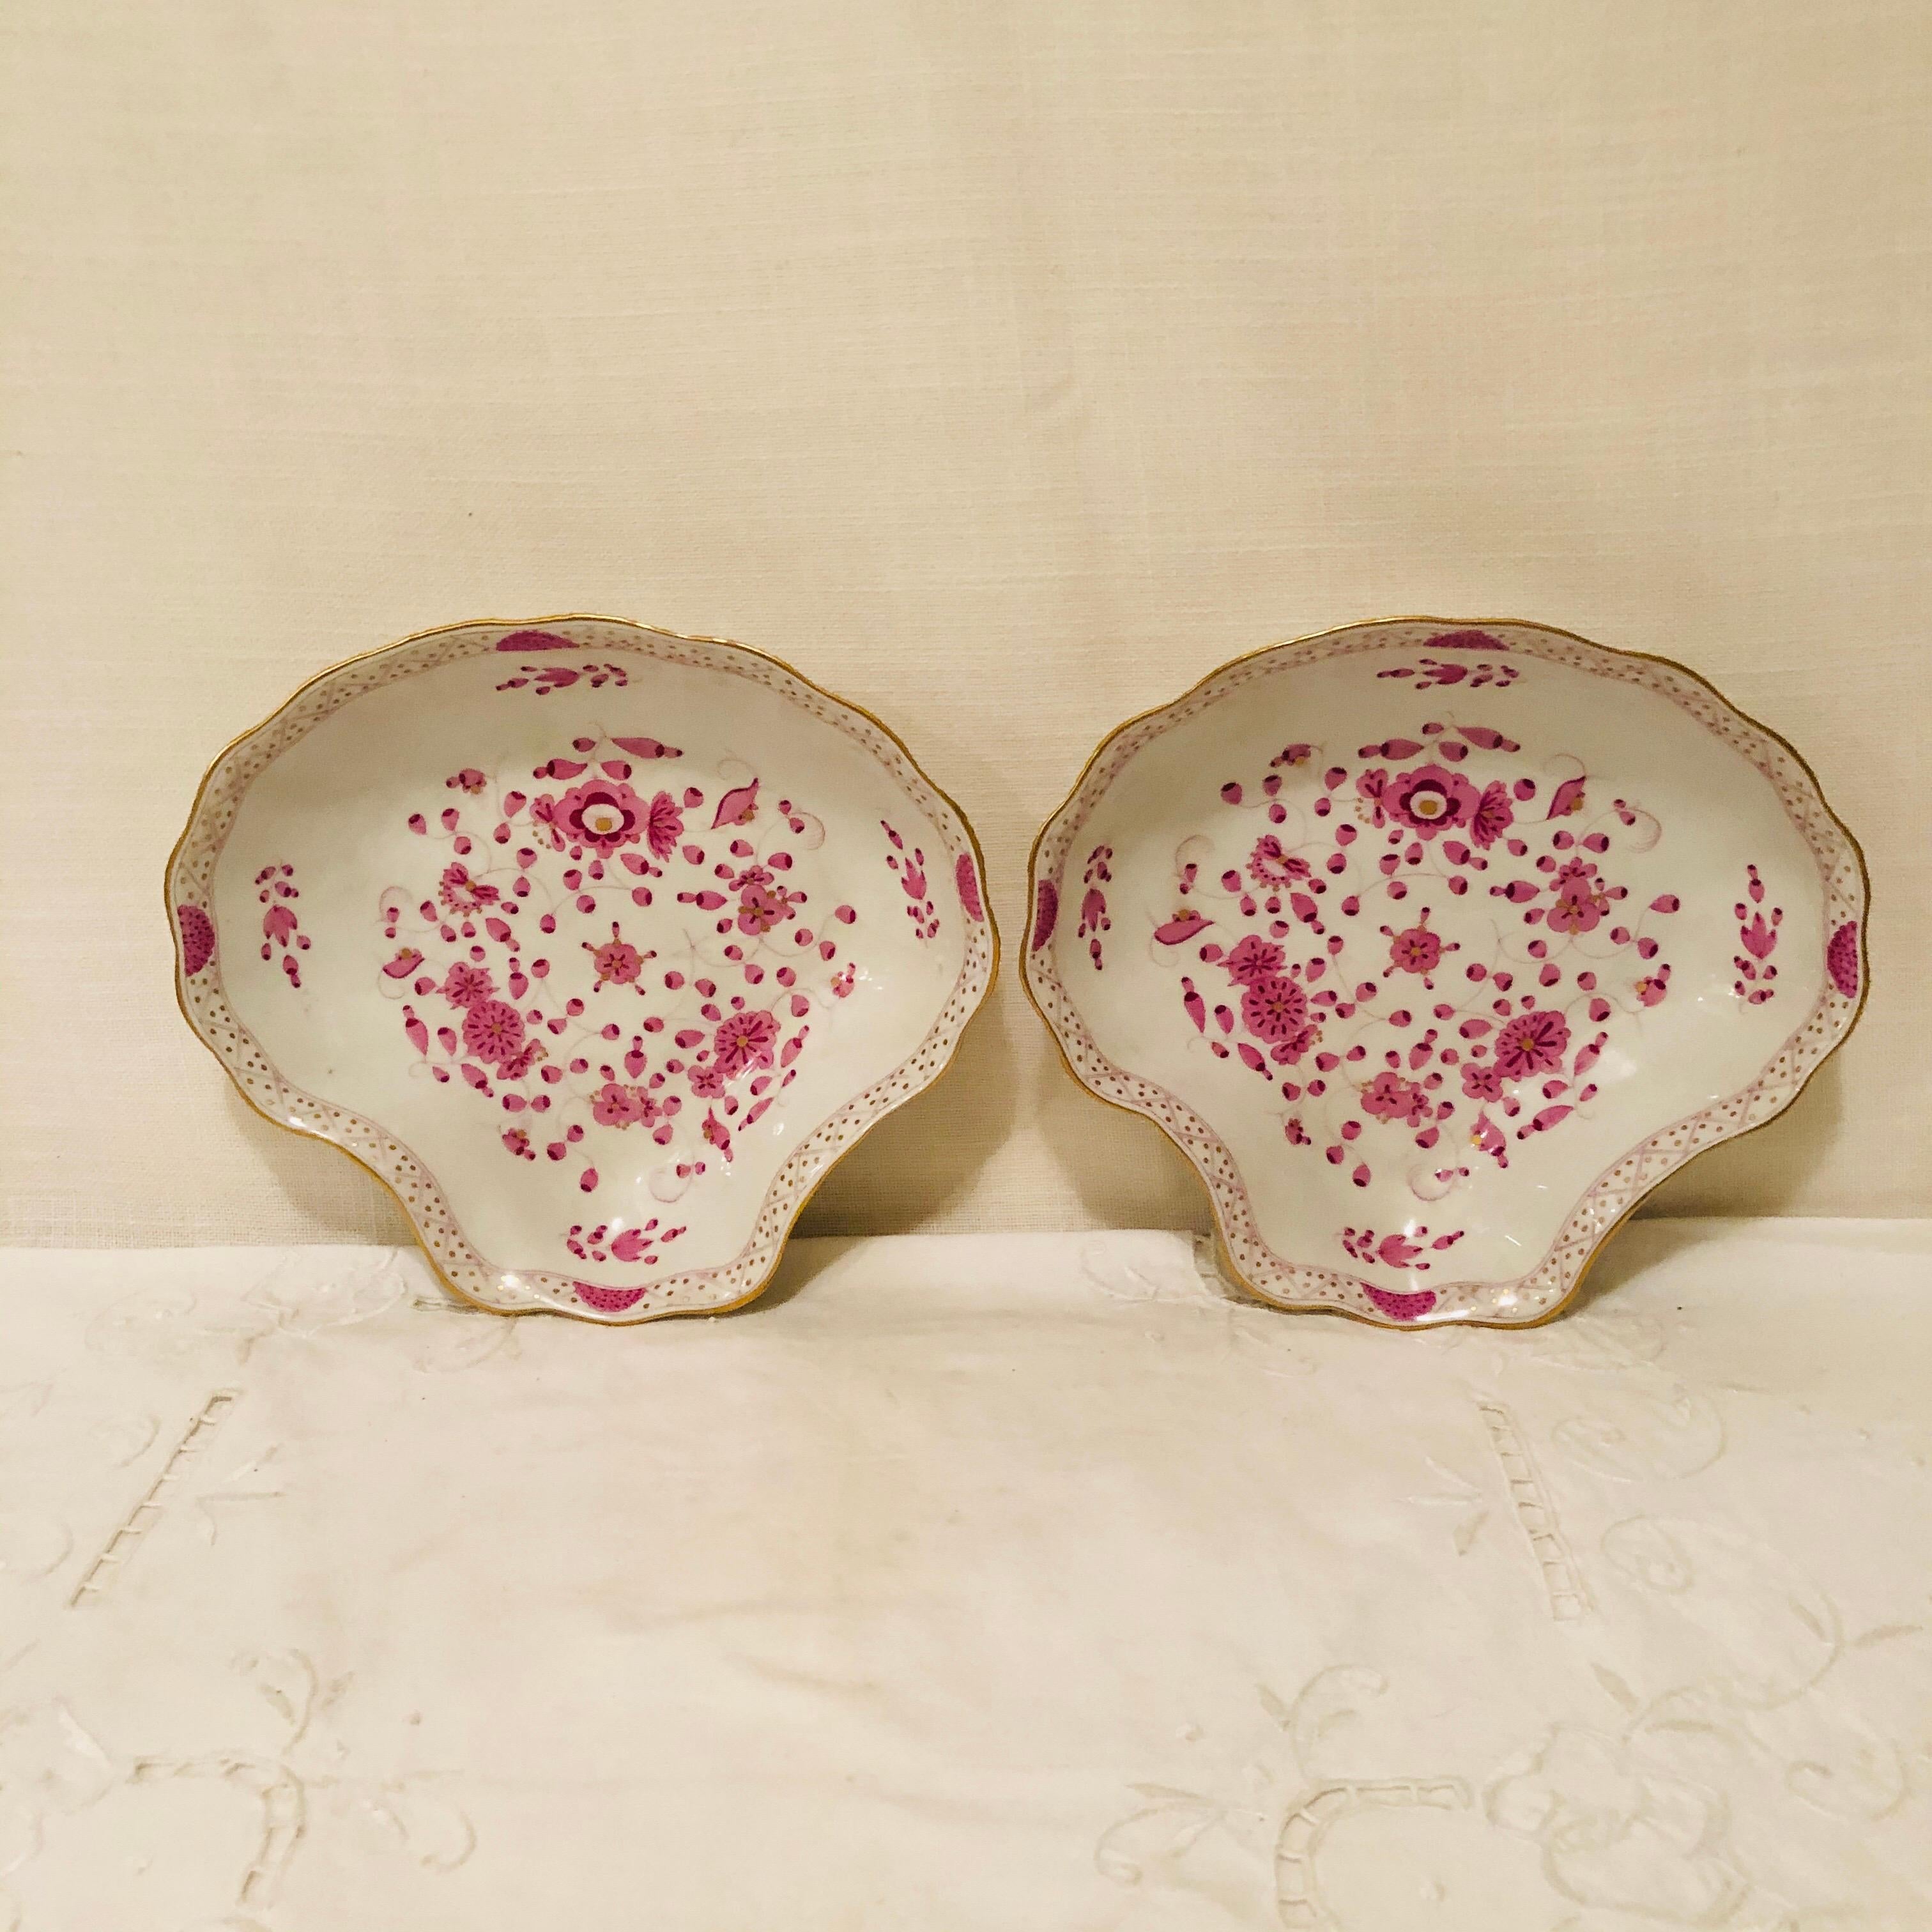 Hand-Painted Meissen Purple Indian Shell Formed Bowls with Seashell Shaped Backs